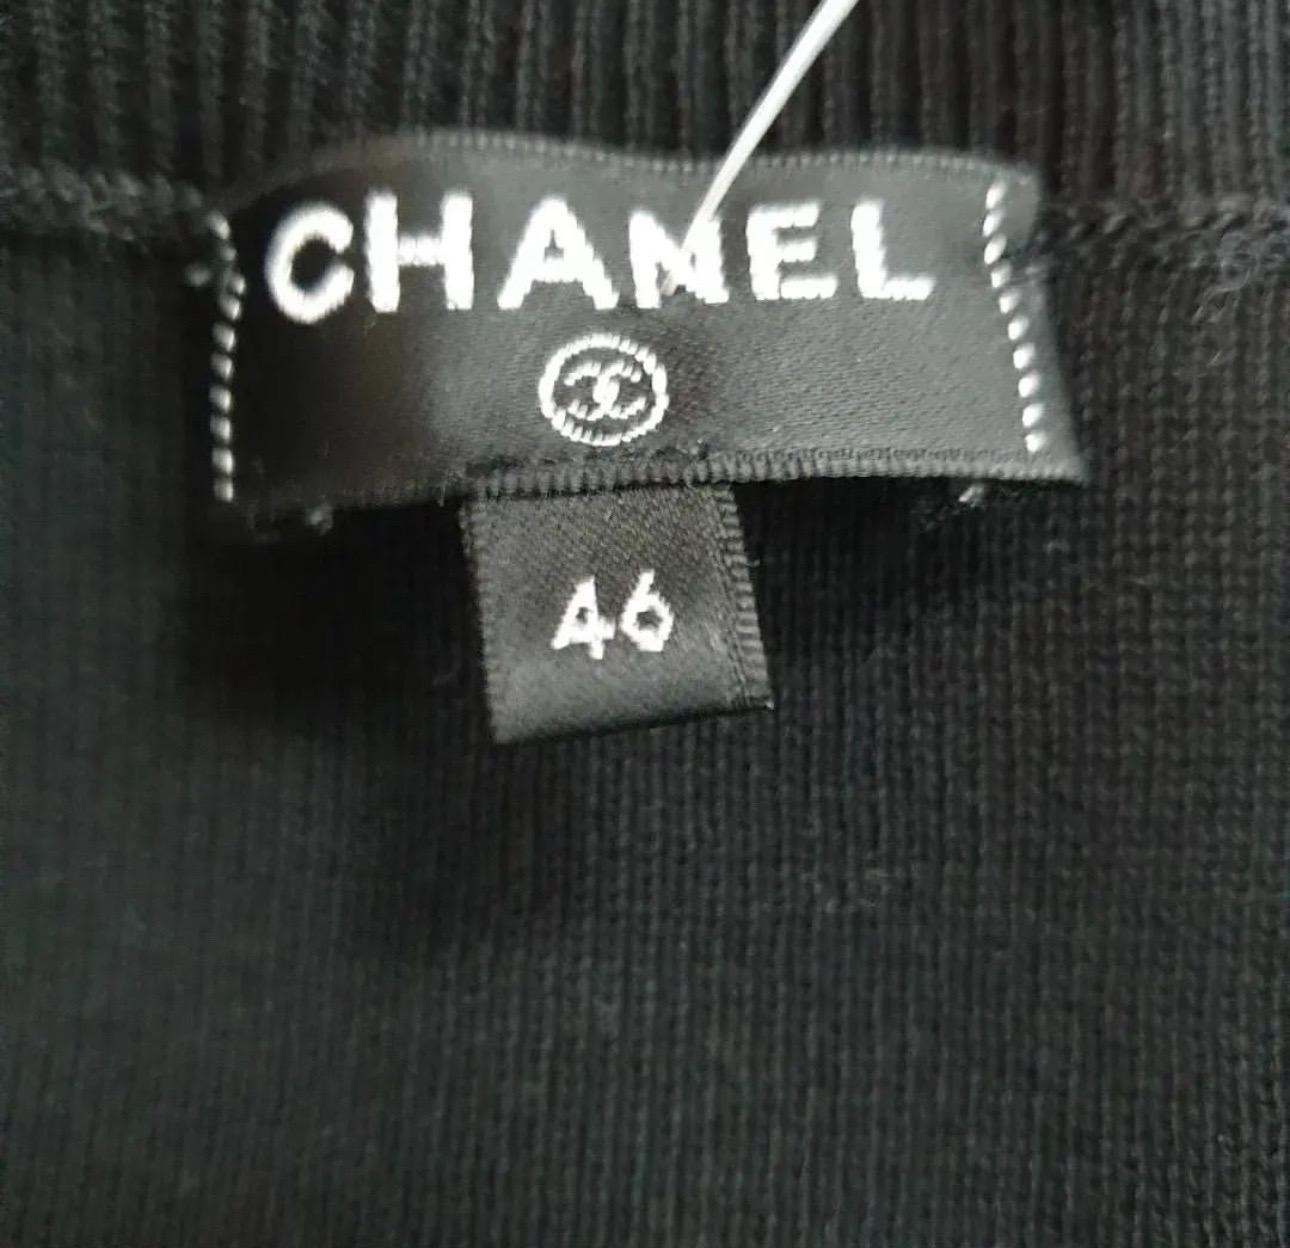 Chanel Black Cuba Short Sleeve Cotton Knitted Dress In Excellent Condition For Sale In Krakow, PL